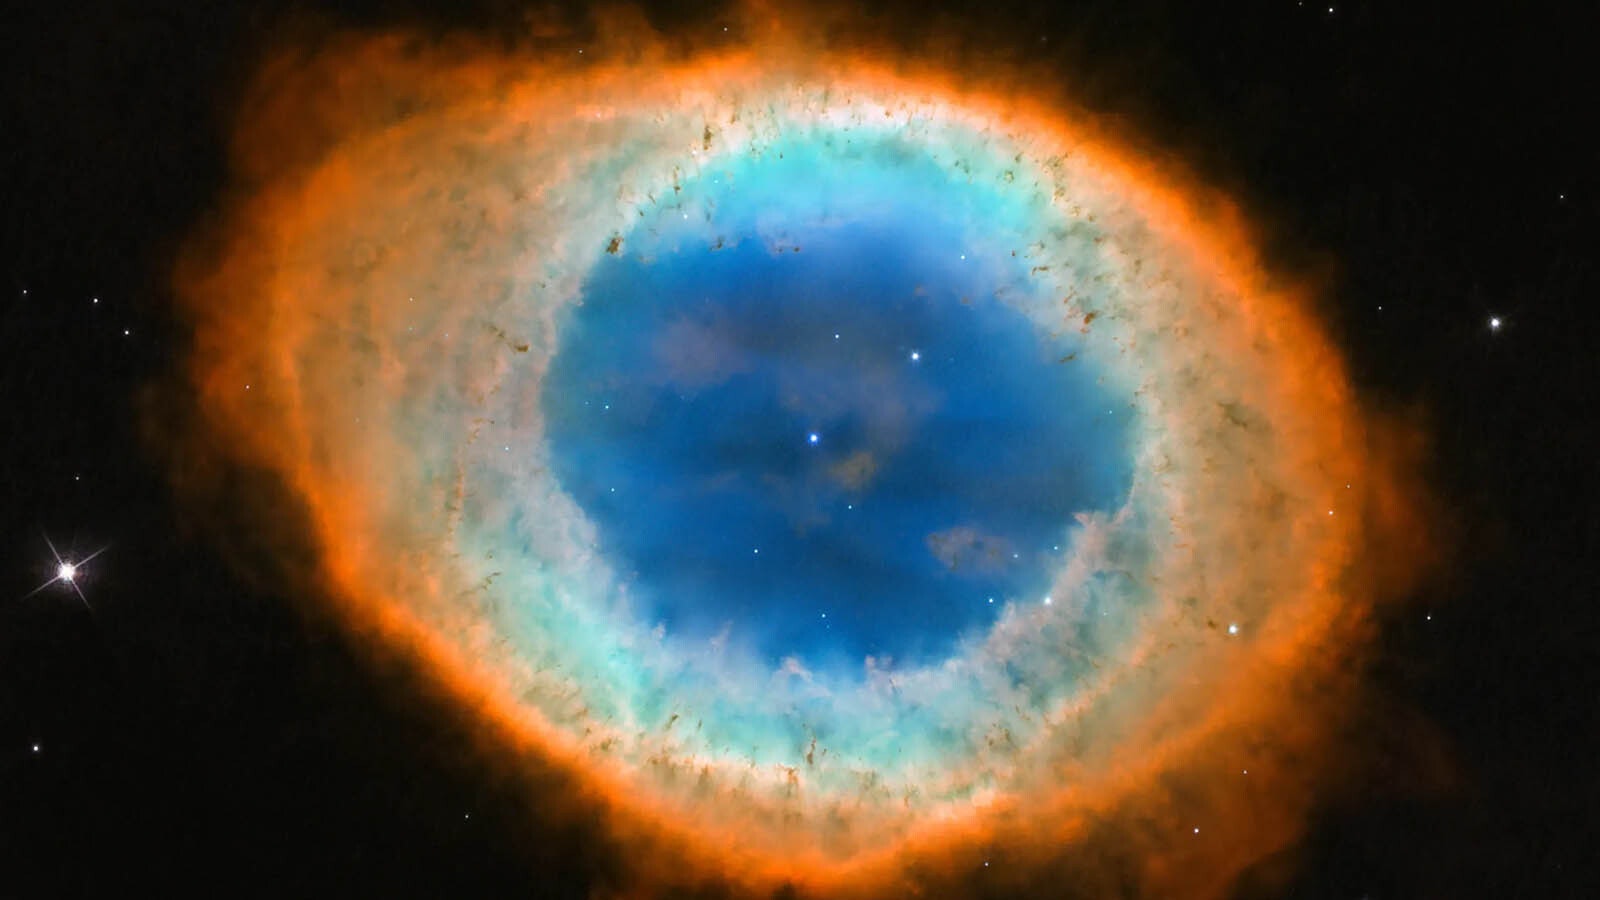 M57, or the Ring Nebula, is a planetary nebula, the glowing remains of a sun-like star. The tiny white dot in the center of the nebula is the star’s hot core, called a white dwarf.